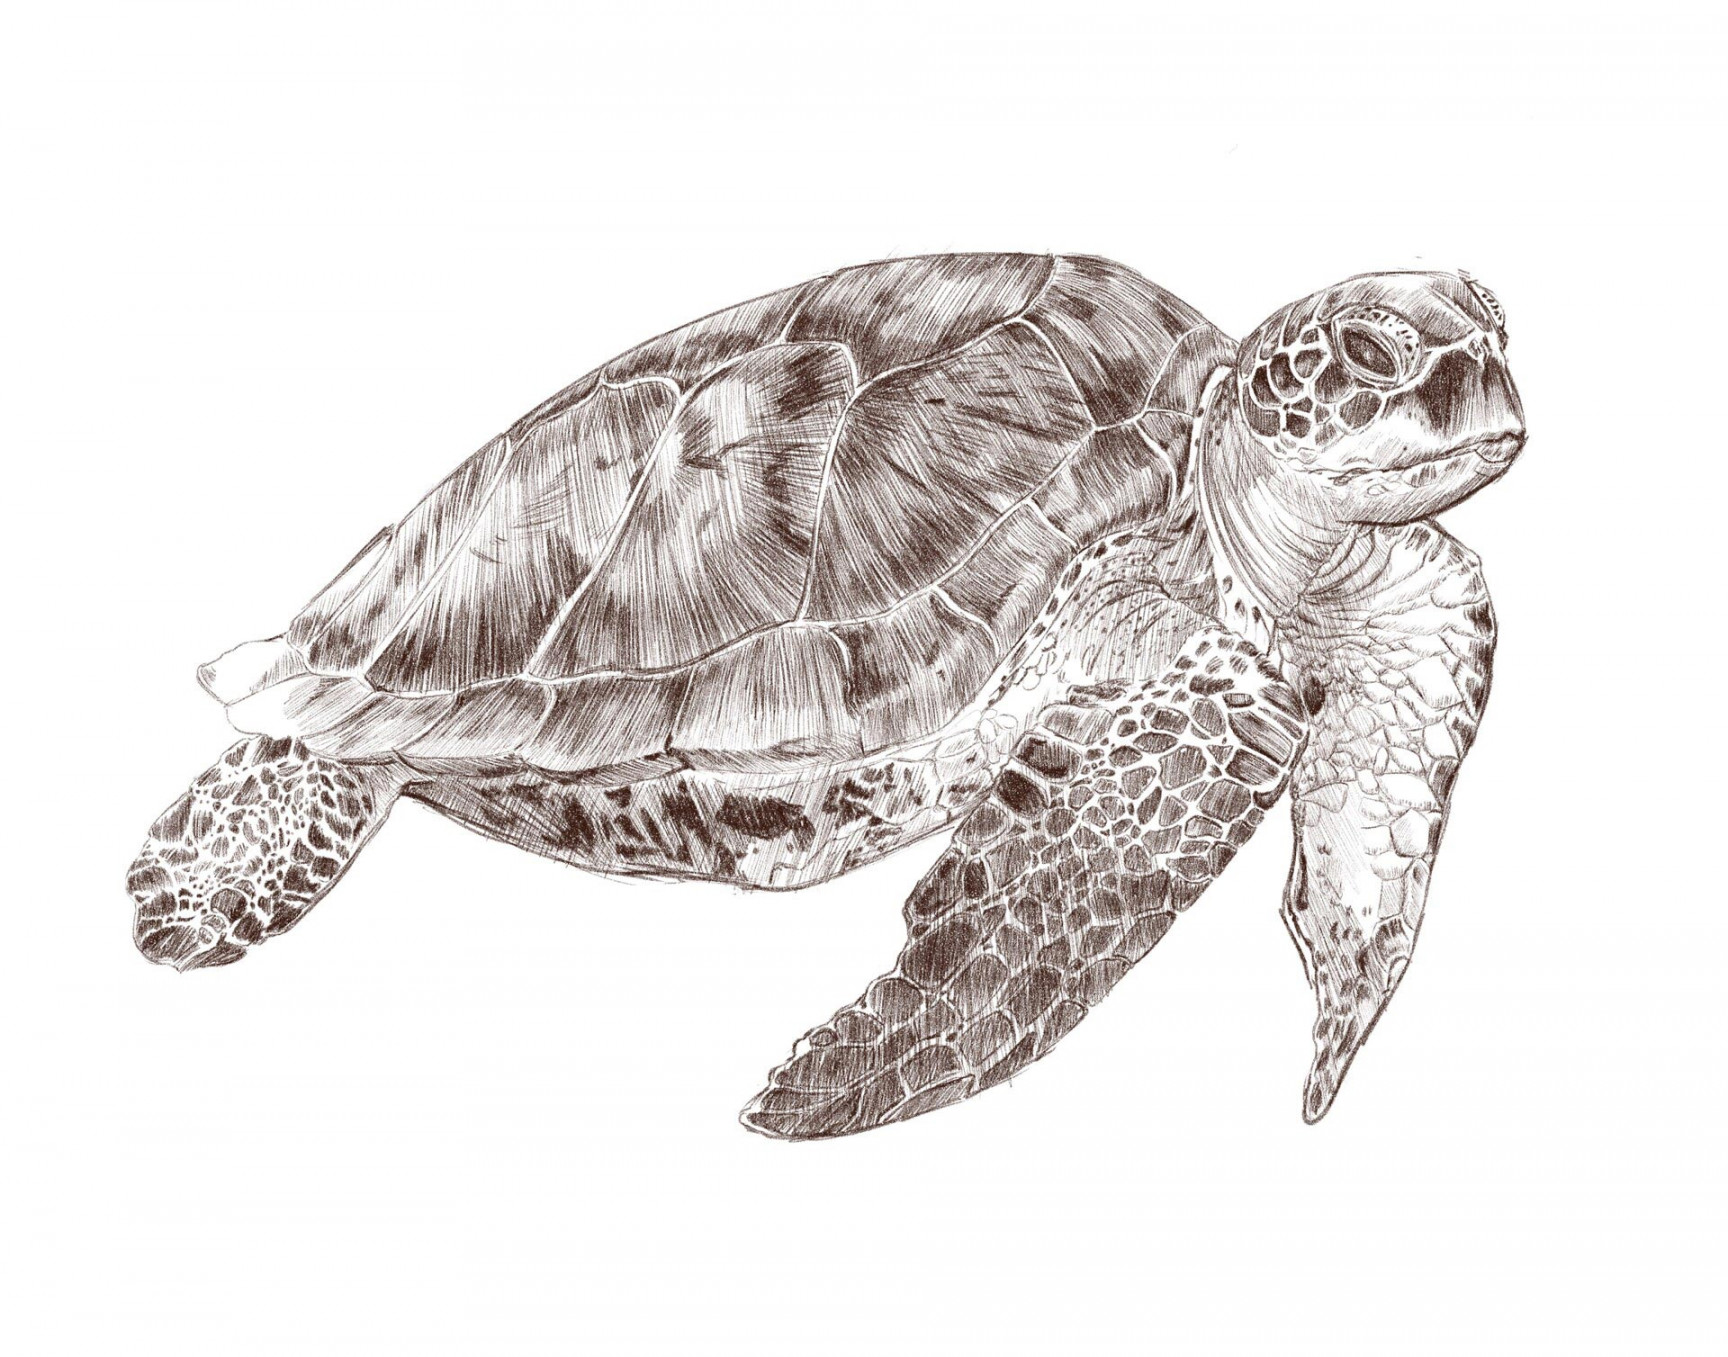 Turtle Drawing Reference and Sketches for Artists